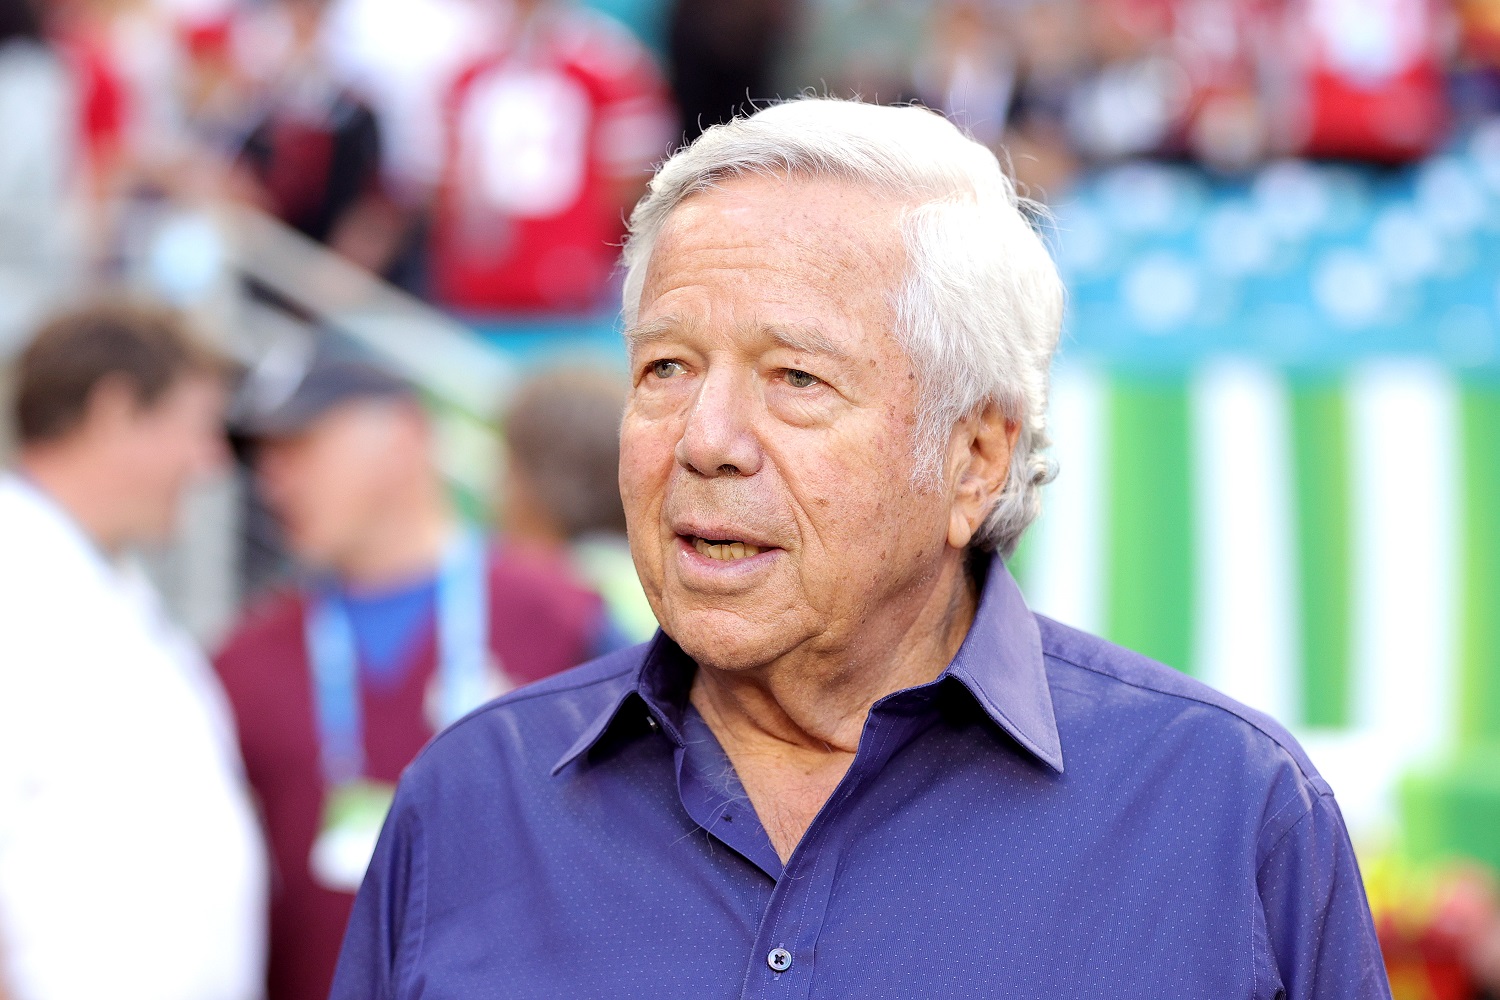 New England Patriots owner Robert Kraft looks on prior to Super Bowl 54 between the San Francisco 49ers and the Kansas City Chiefs at Hard Rock Stadium on Feb. 2, 2020.